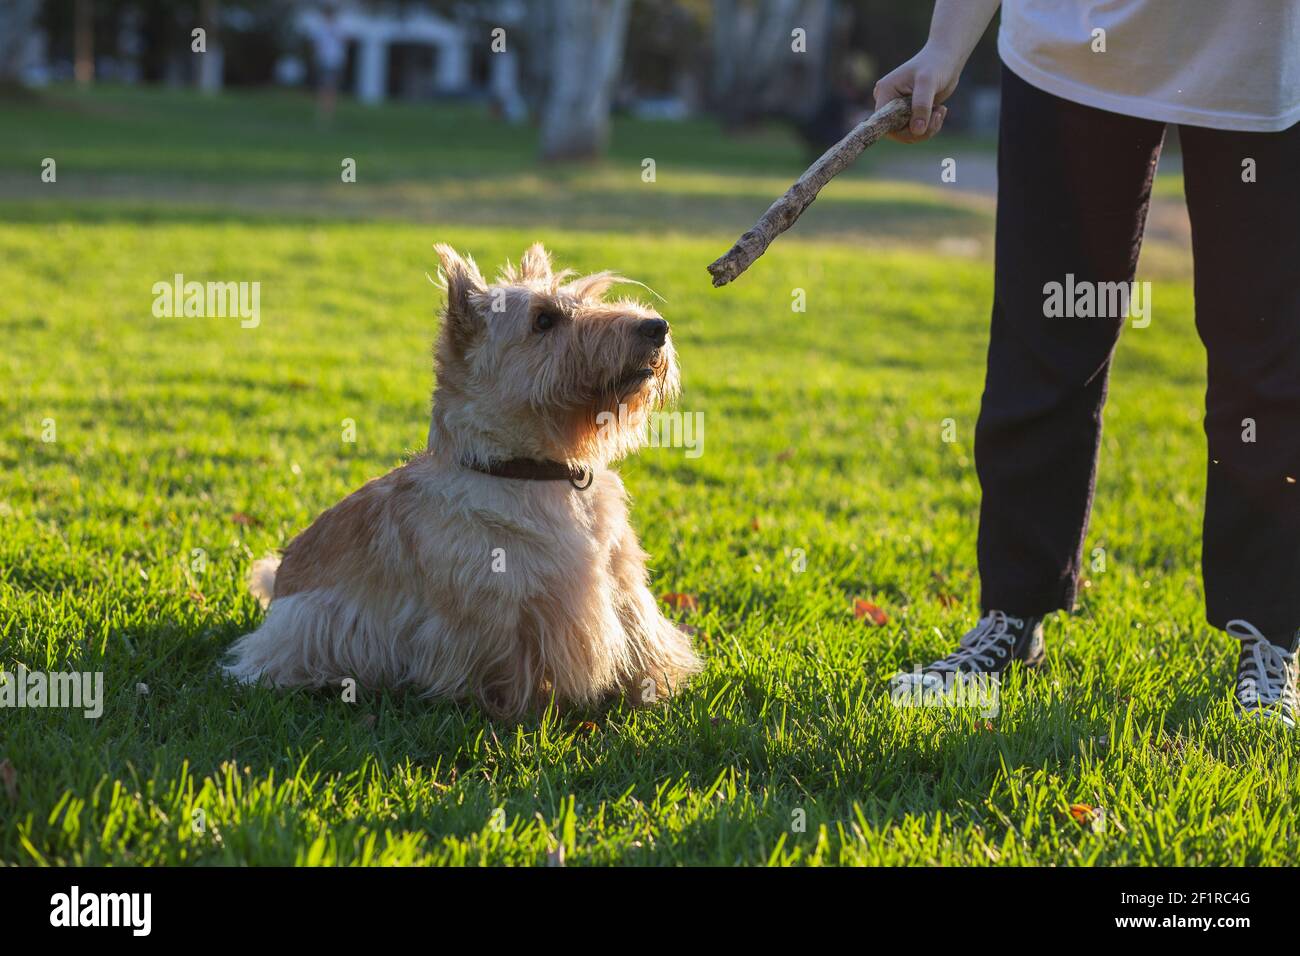 A girl plays with her dog in a Buenos Aires city park Stock Photo